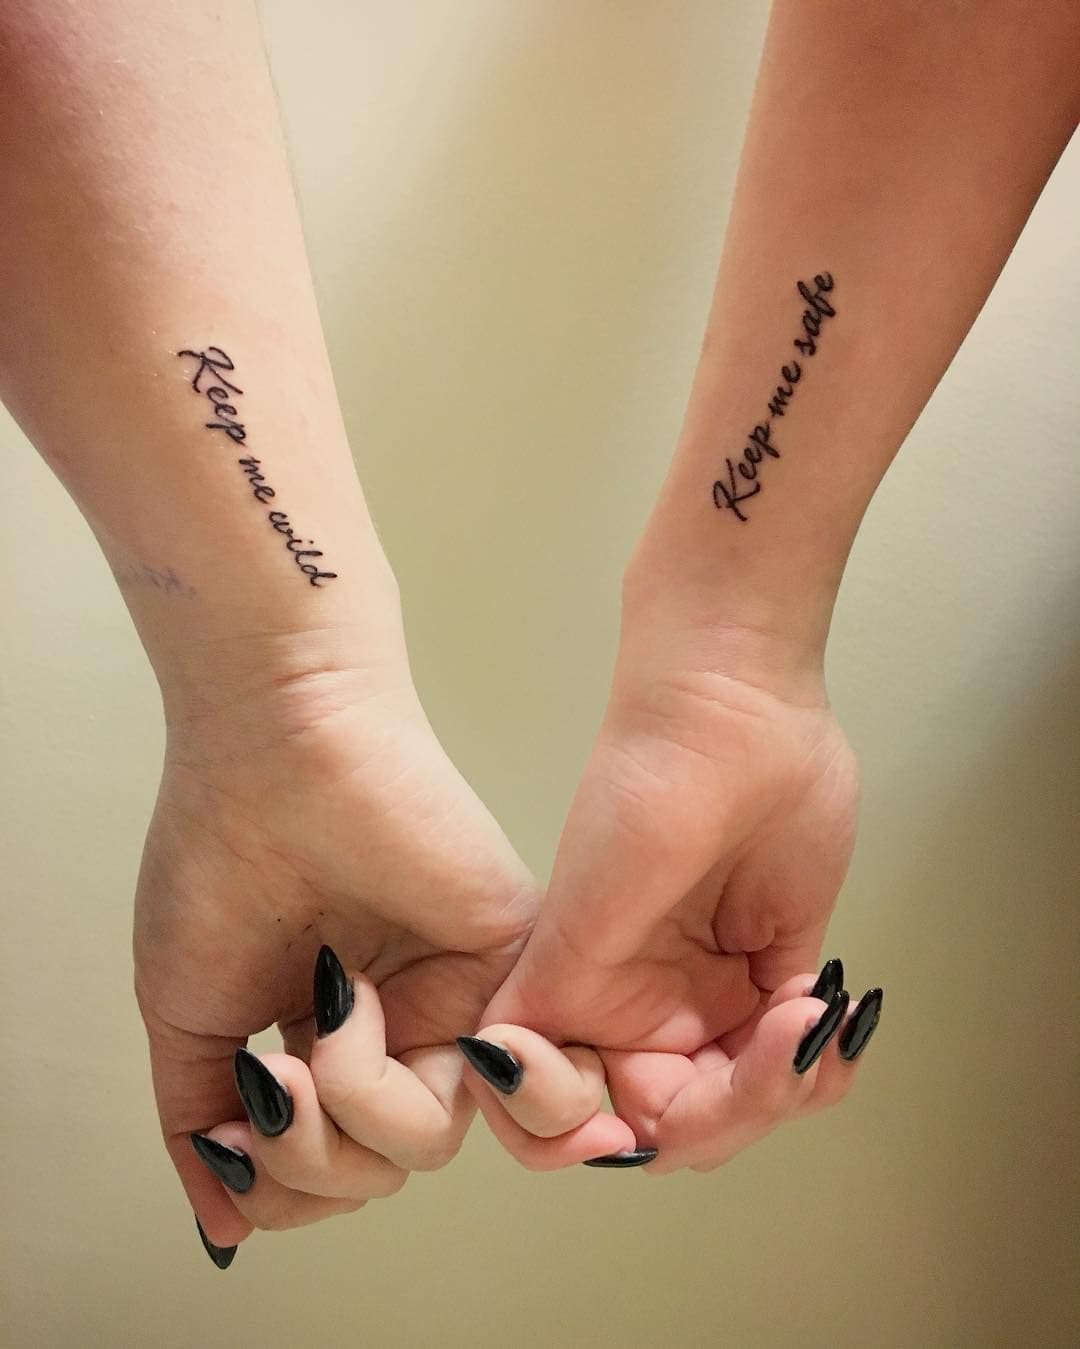 25 Best Friend Tattoos for You and Your Squad - Brit + Co